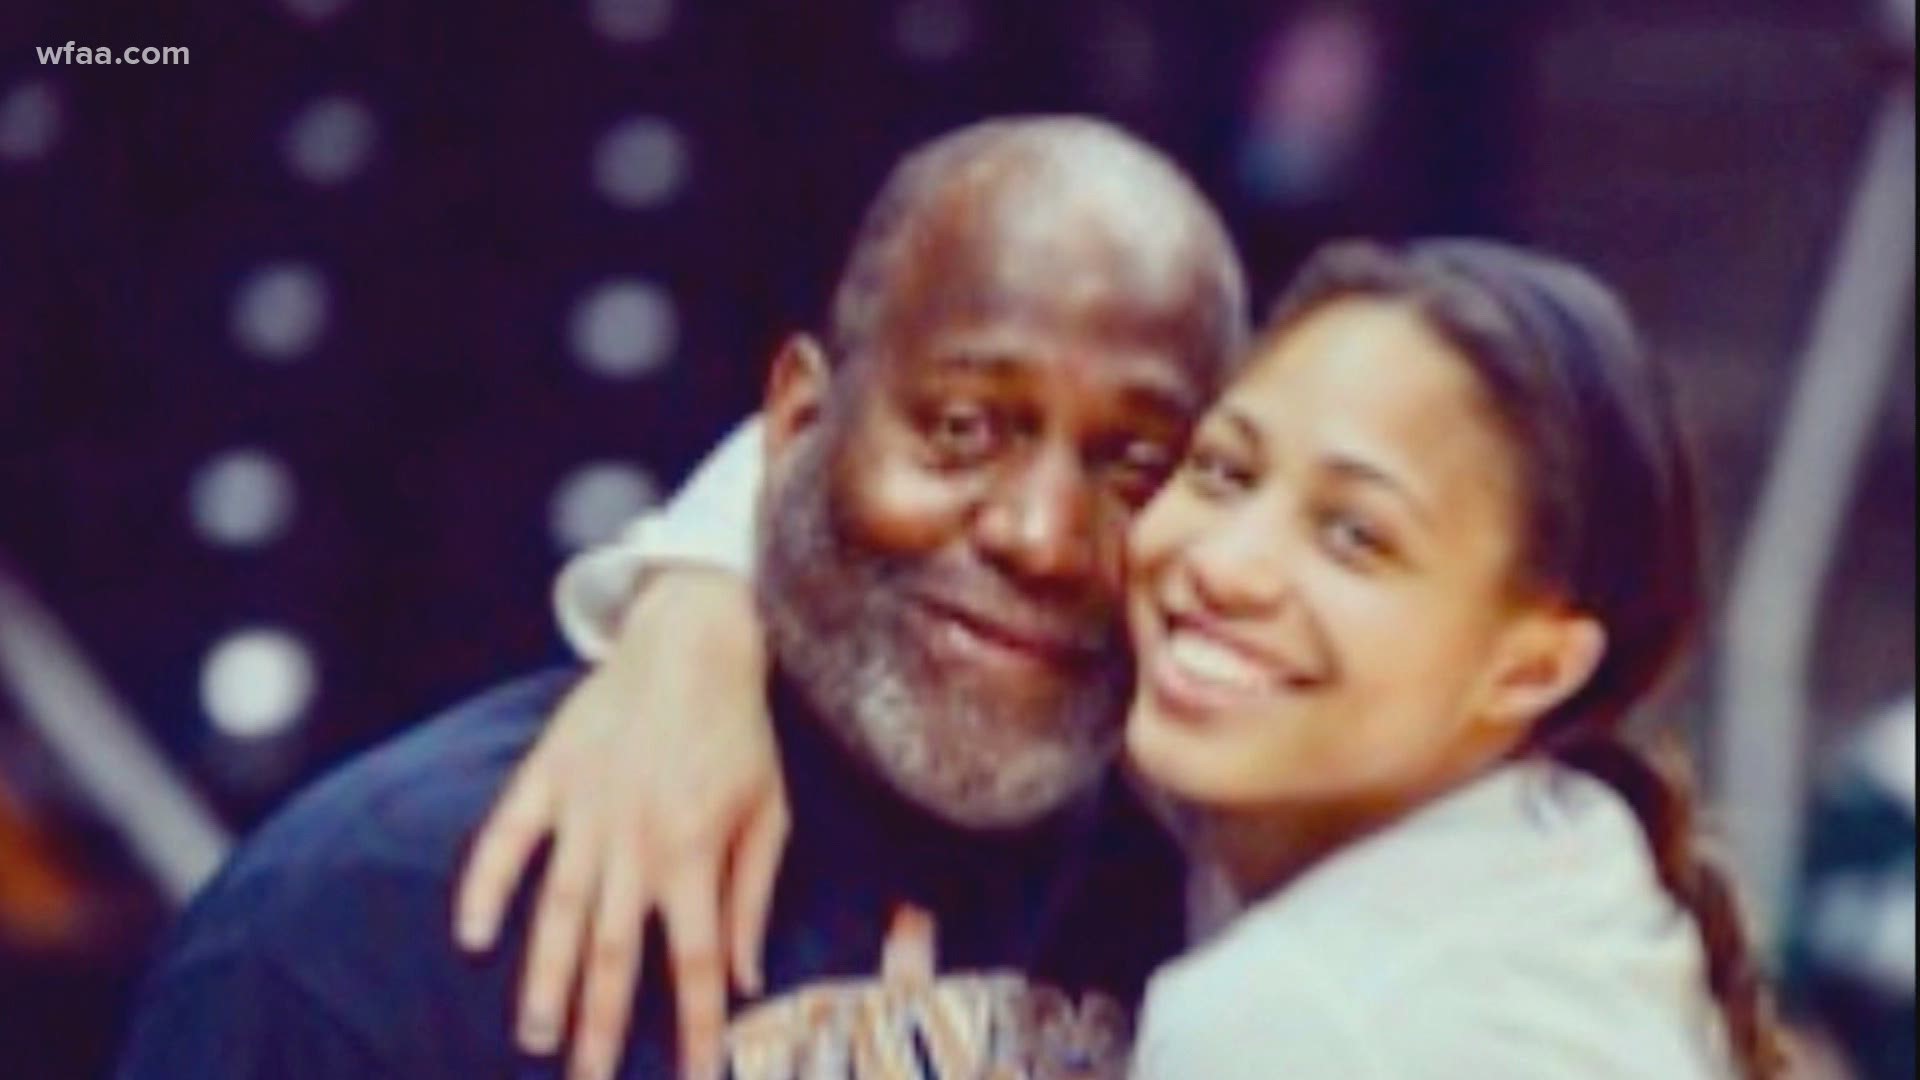 Dallas Wings' Isabelle Harrison talks about relationship with her father, as she prepares for the upcoming WNBA season ahead of Father's Day.